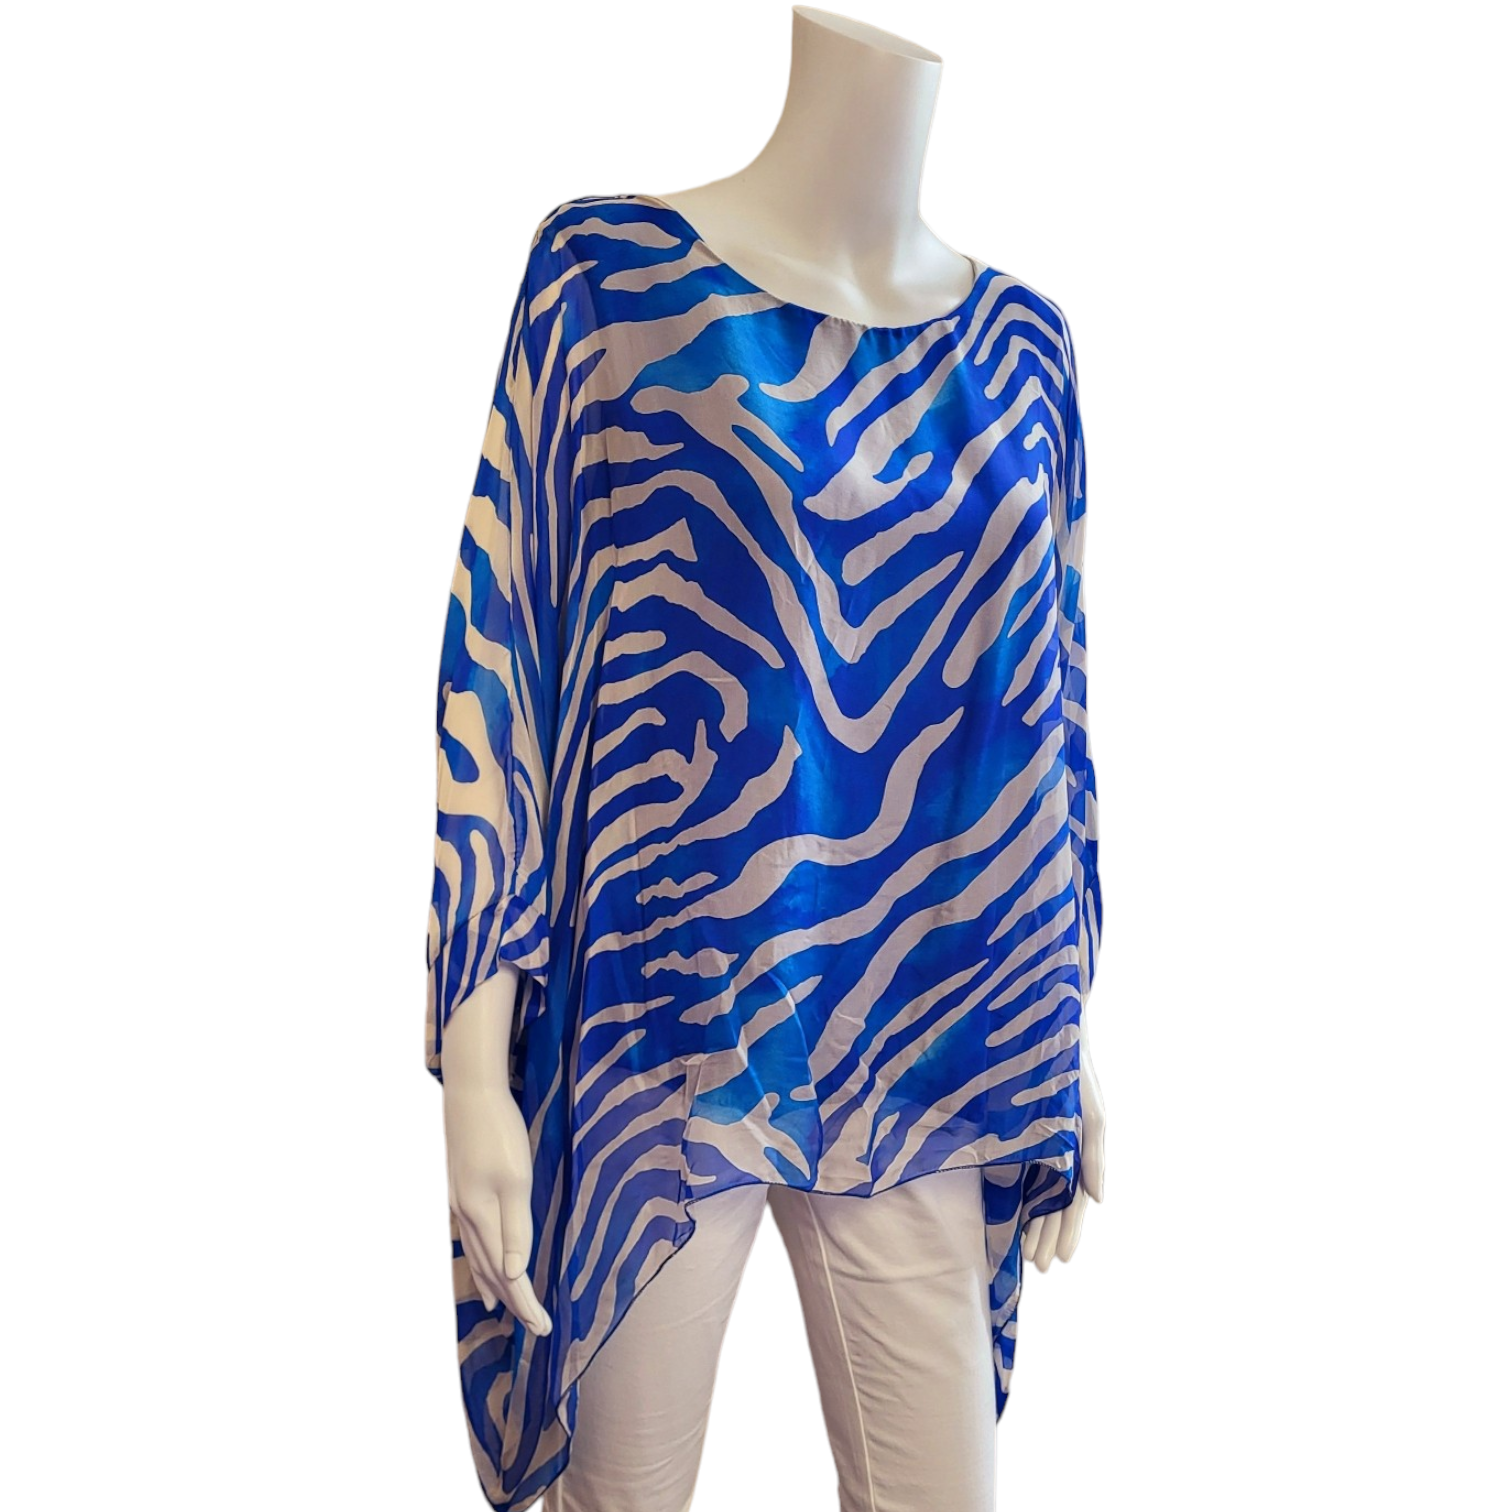 sap[hre blue zebra printed top with long sleeves and a scoop neck. longer dipped sides.